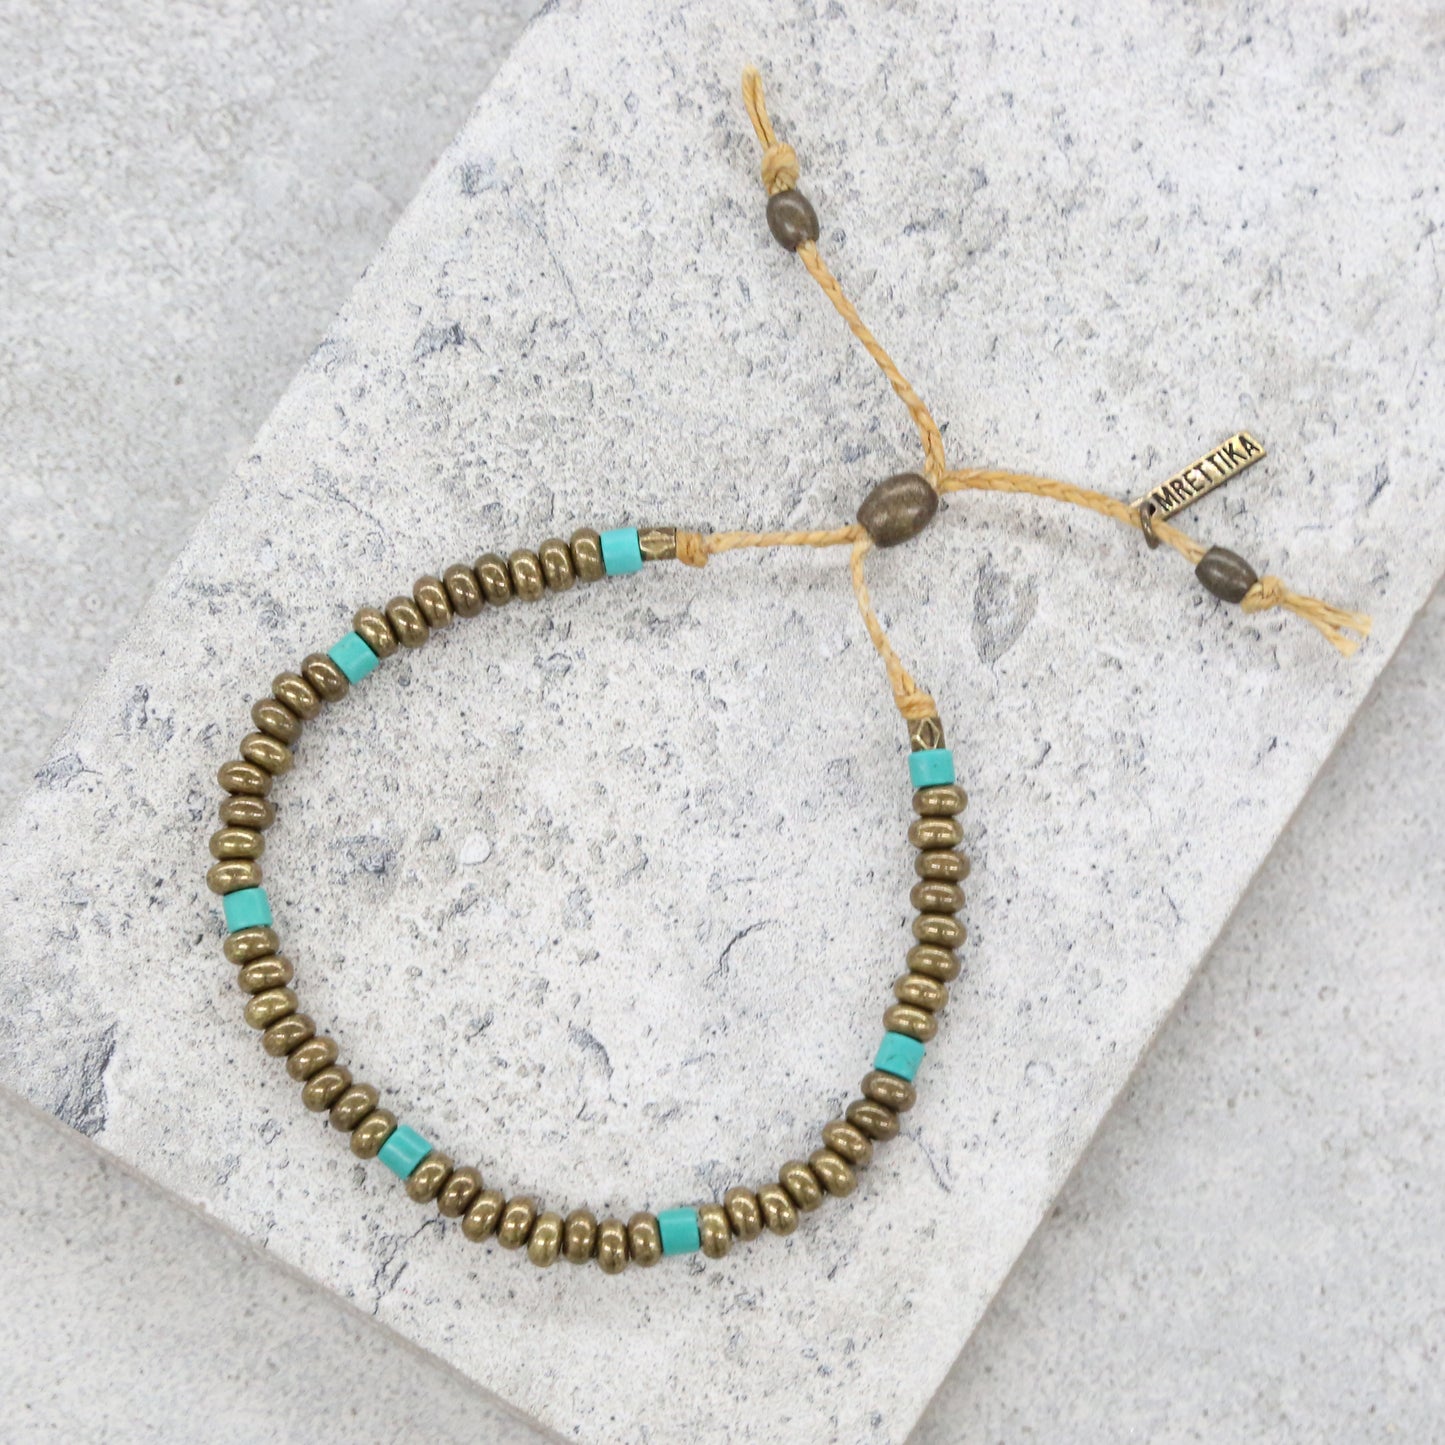 He Donis Bracelet in Turquoise and Brass